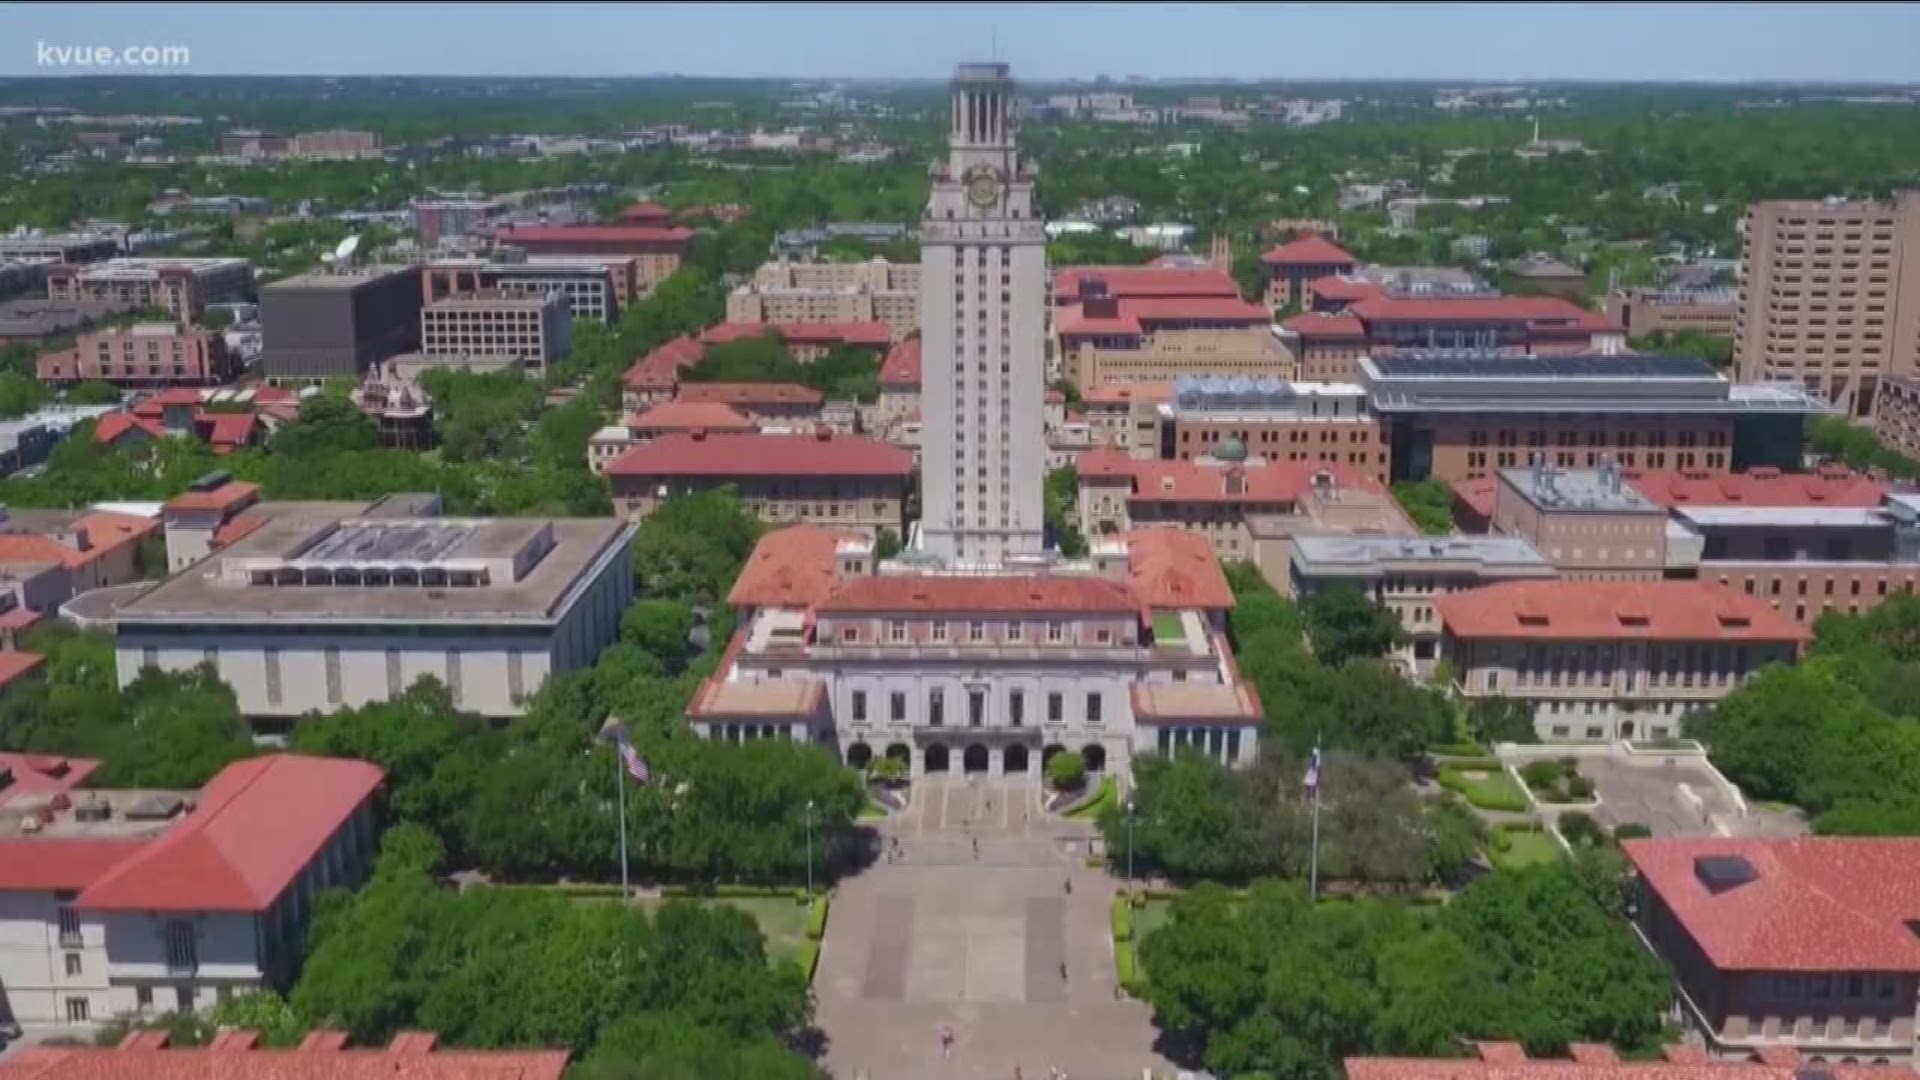 The University of Texas is taking student concerns seriously after reports of sexual misconduct.